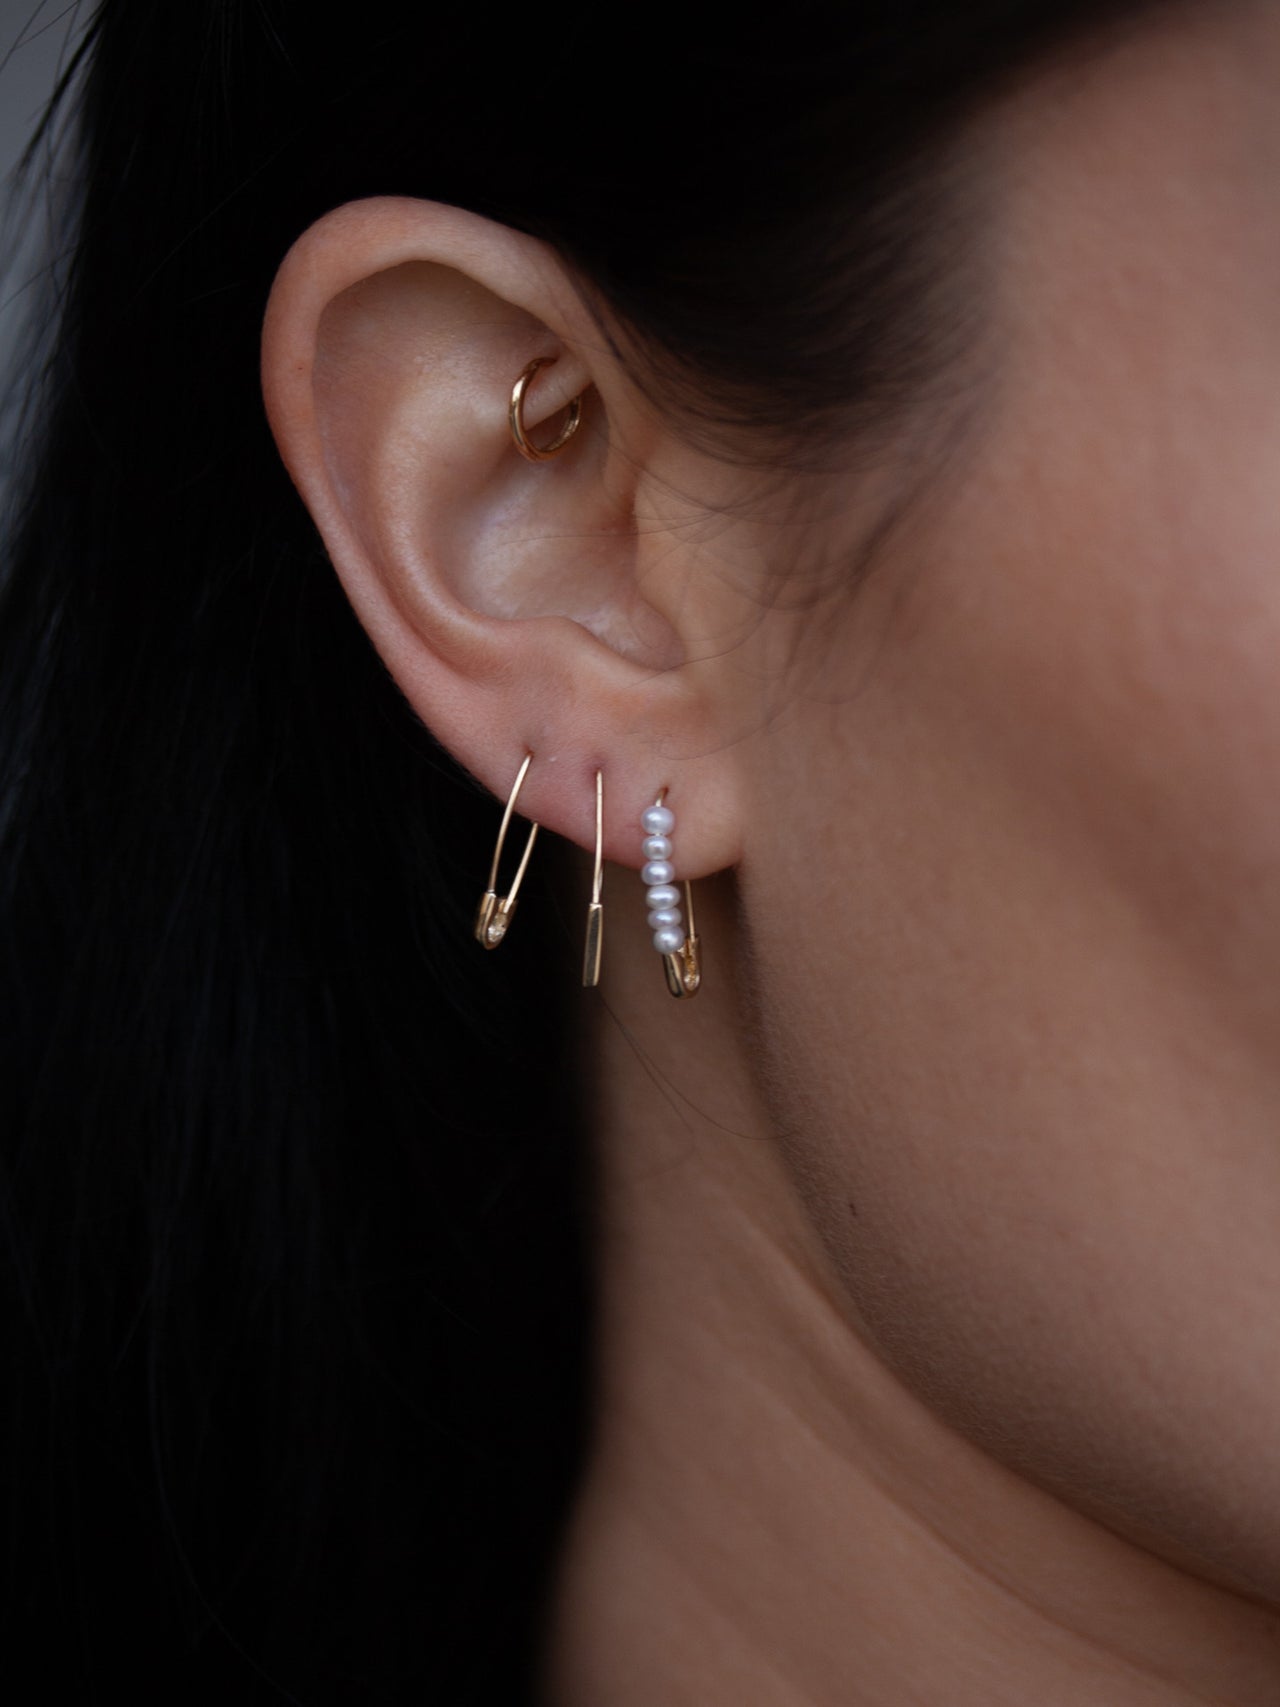 Mini Friendship Safety Pin Earring pictured in models first piercing.  Stacked with other safety pin earrings.